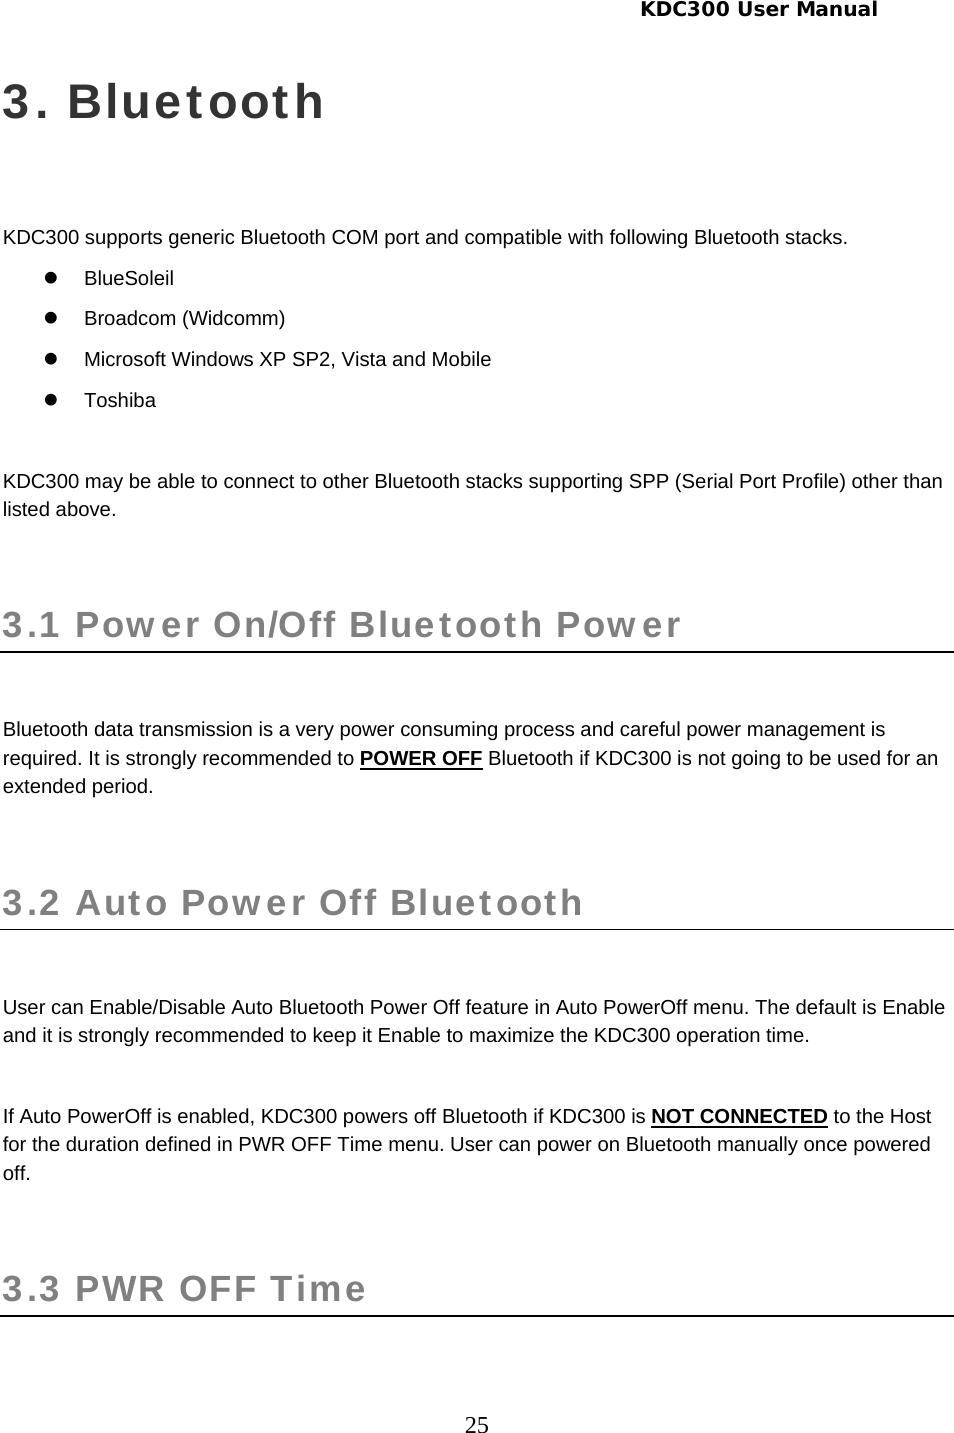     KDC300 User Manual 25 3. Bluetooth  KDC300 supports generic Bluetooth COM port and compatible with following Bluetooth stacks. z BlueSoleil z Broadcom (Widcomm) z  Microsoft Windows XP SP2, Vista and Mobile z Toshiba  KDC300 may be able to connect to other Bluetooth stacks supporting SPP (Serial Port Profile) other than listed above.  3.1 Power On/Off Bluetooth Power   Bluetooth data transmission is a very power consuming process and careful power management is required. It is strongly recommended to POWER OFF Bluetooth if KDC300 is not going to be used for an extended period.  3.2 Auto Power Off Bluetooth   User can Enable/Disable Auto Bluetooth Power Off feature in Auto PowerOff menu. The default is Enable and it is strongly recommended to keep it Enable to maximize the KDC300 operation time.   If Auto PowerOff is enabled, KDC300 powers off Bluetooth if KDC300 is NOT CONNECTED to the Host for the duration defined in PWR OFF Time menu. User can power on Bluetooth manually once powered off.  3.3 PWR OFF Time   